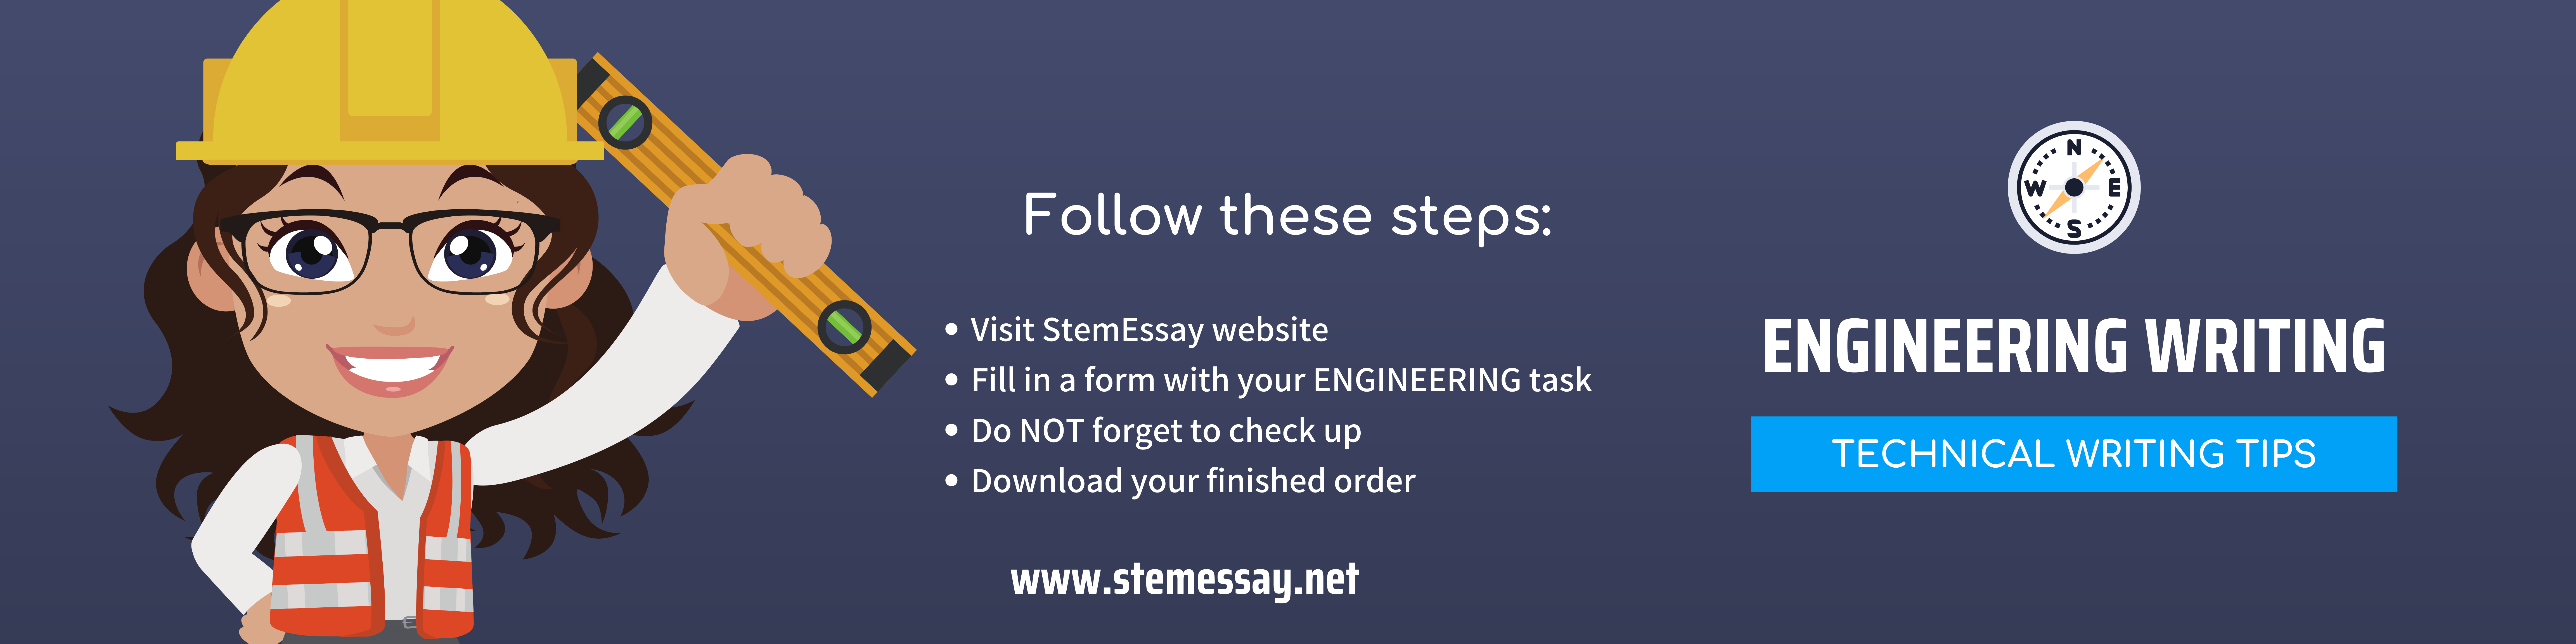 ENGINEERING TECHNICAL WRITER AND TECHNICAL WRITING SKILLS for StemEssay.net